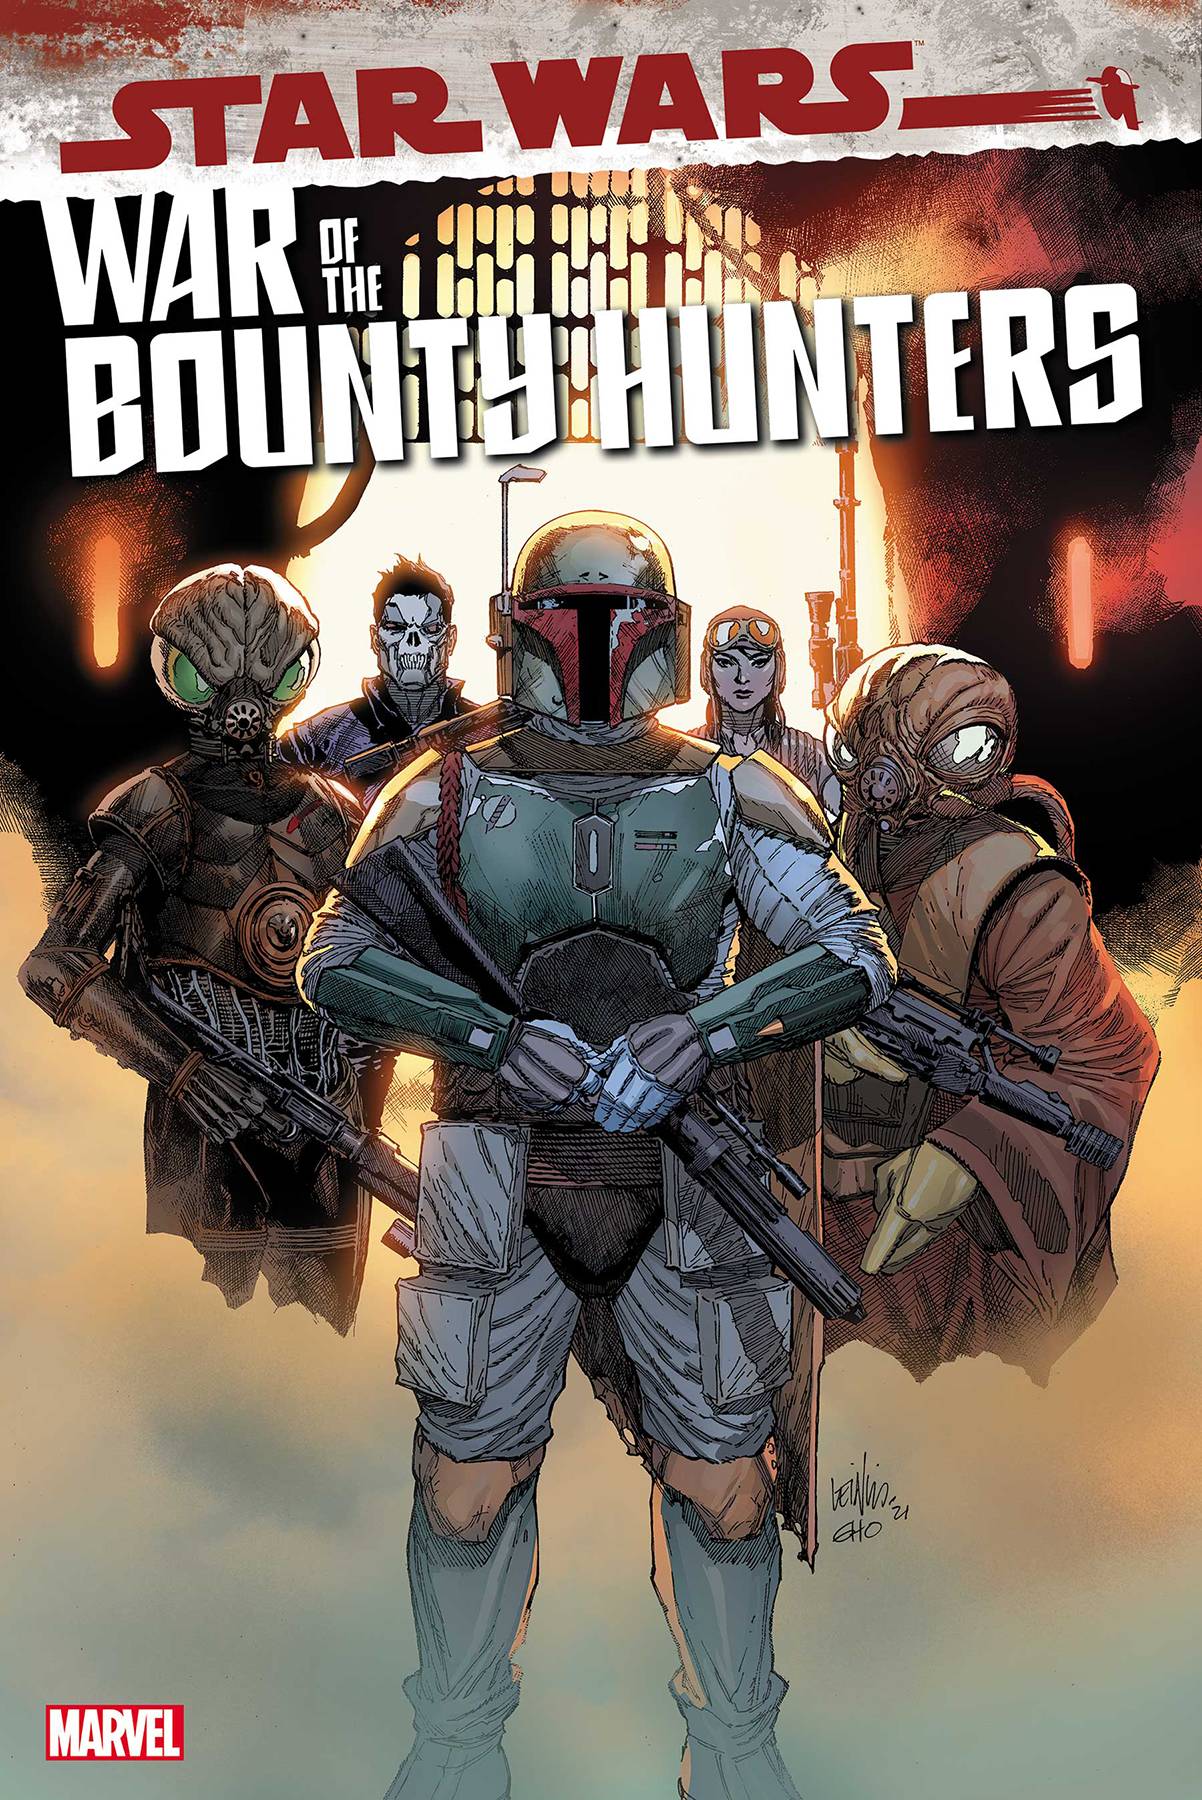 STAR WARS WAR OF THE BOUNTY HUNTERS #1 FRANCIS YU 1:25 INCENTIVE RETAILER VARIANT